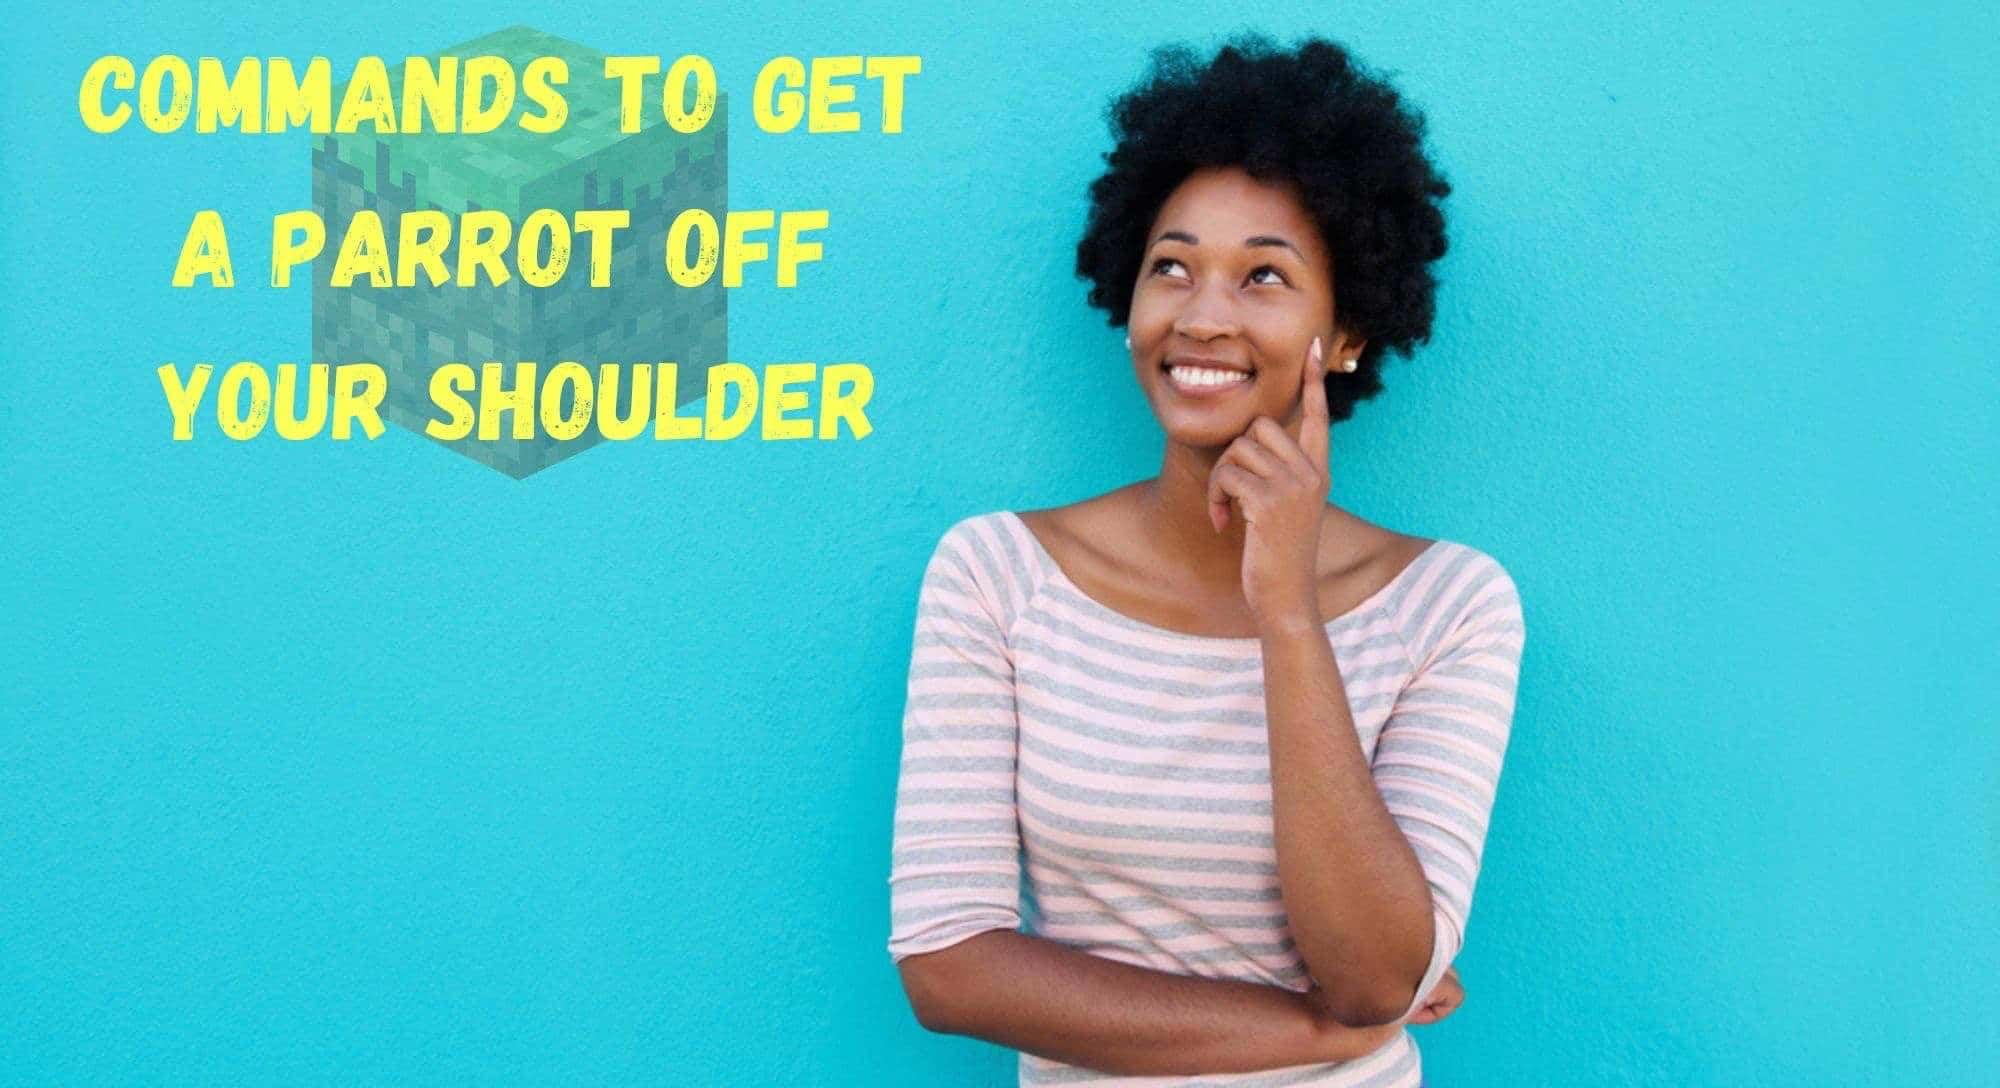 Command to get a parrot off your shoulder